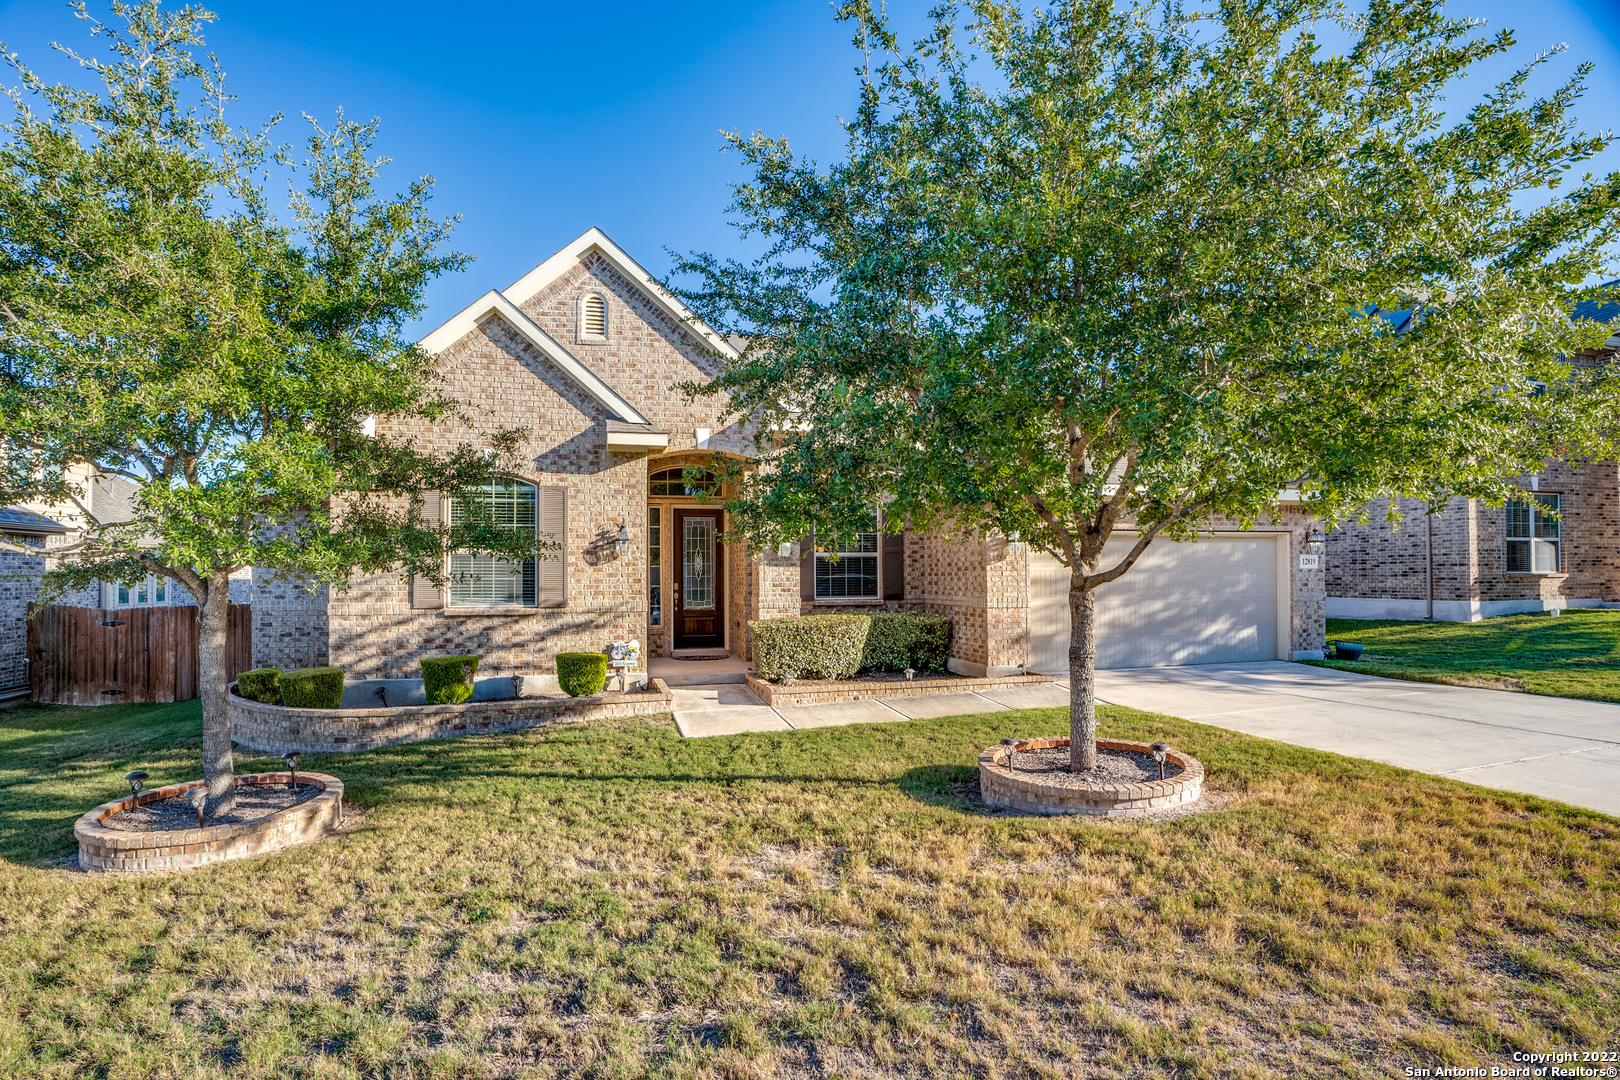 Stunning single-story home in the prestigious Summit at Alamo Ranch gated community ready for move-in! Conveniently located near Loop 1604, Loop 410, Seaworld, and plenty of shopping and dining. Original owner has maintained the wonderful curb appeal and high-quality interior for you to enjoy. Spacious floor plan provides a generously-sized dining room upon entry - perfect for holidays - and a private study with French doors. Light-filled living room with ceramic flooring offers a beautiful enclosed stone fireplace, backyard views, and outdoor access. Abundant natural light flows throughout the home with arched entryways and soaring ceilings! Open kitchen features extensive cabinetry, gas cook top, built-in oven, walk-in pantry, breakfast nook, and stainless-steel appliances. Master suite has its own private bath with walk-in shower, a whirlpool garden tub, separate vanities, and roomy walk-in closet. Outdoors, find a charming, fully covered flagstone patio with ceiling fans and added pergola- truly a backyard oasis!